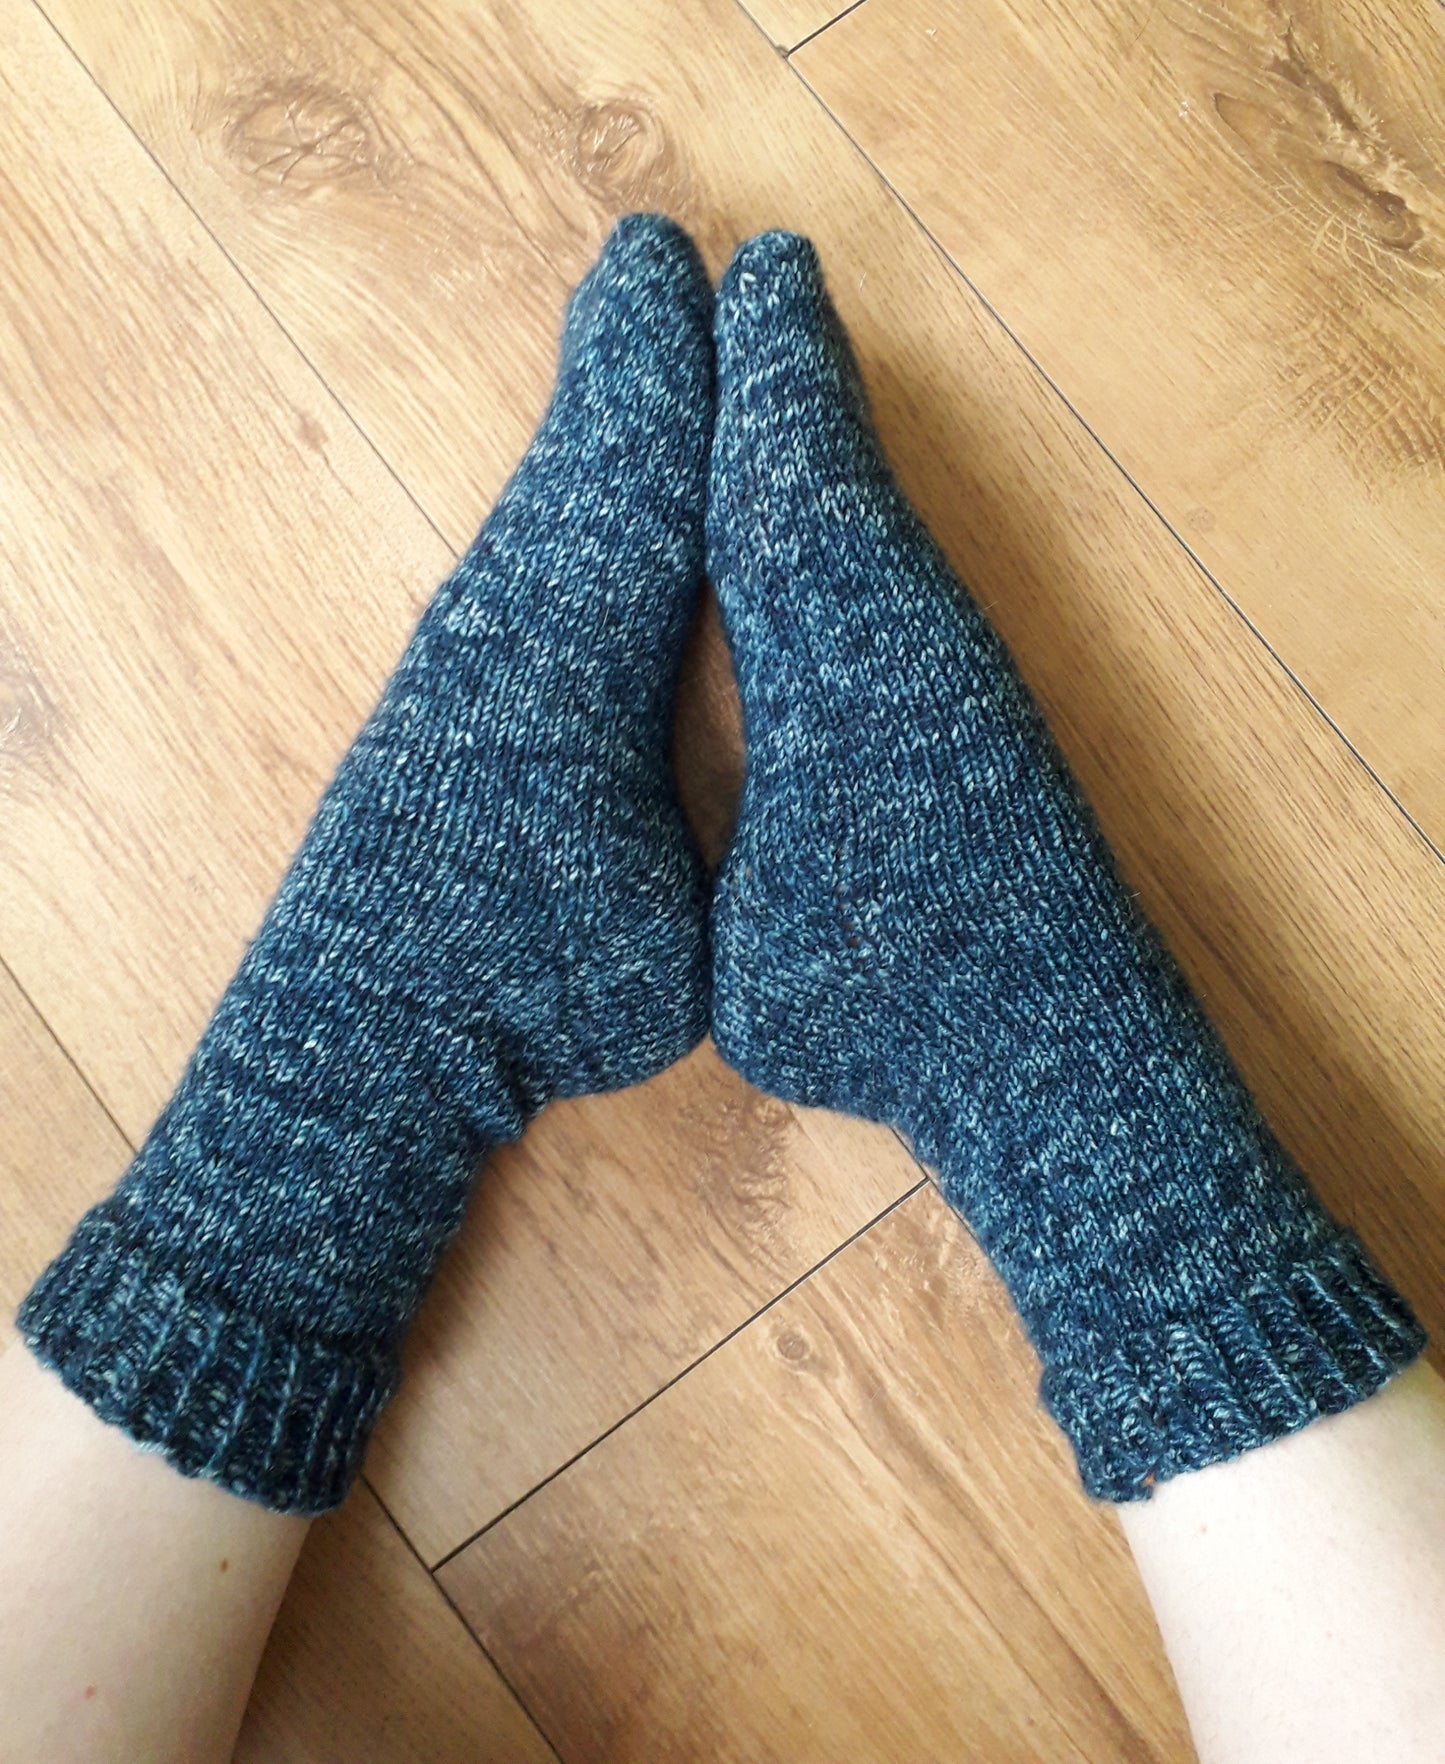 Basic DK boot socks knitting pattern. Knit these cuff down socks in the round. 